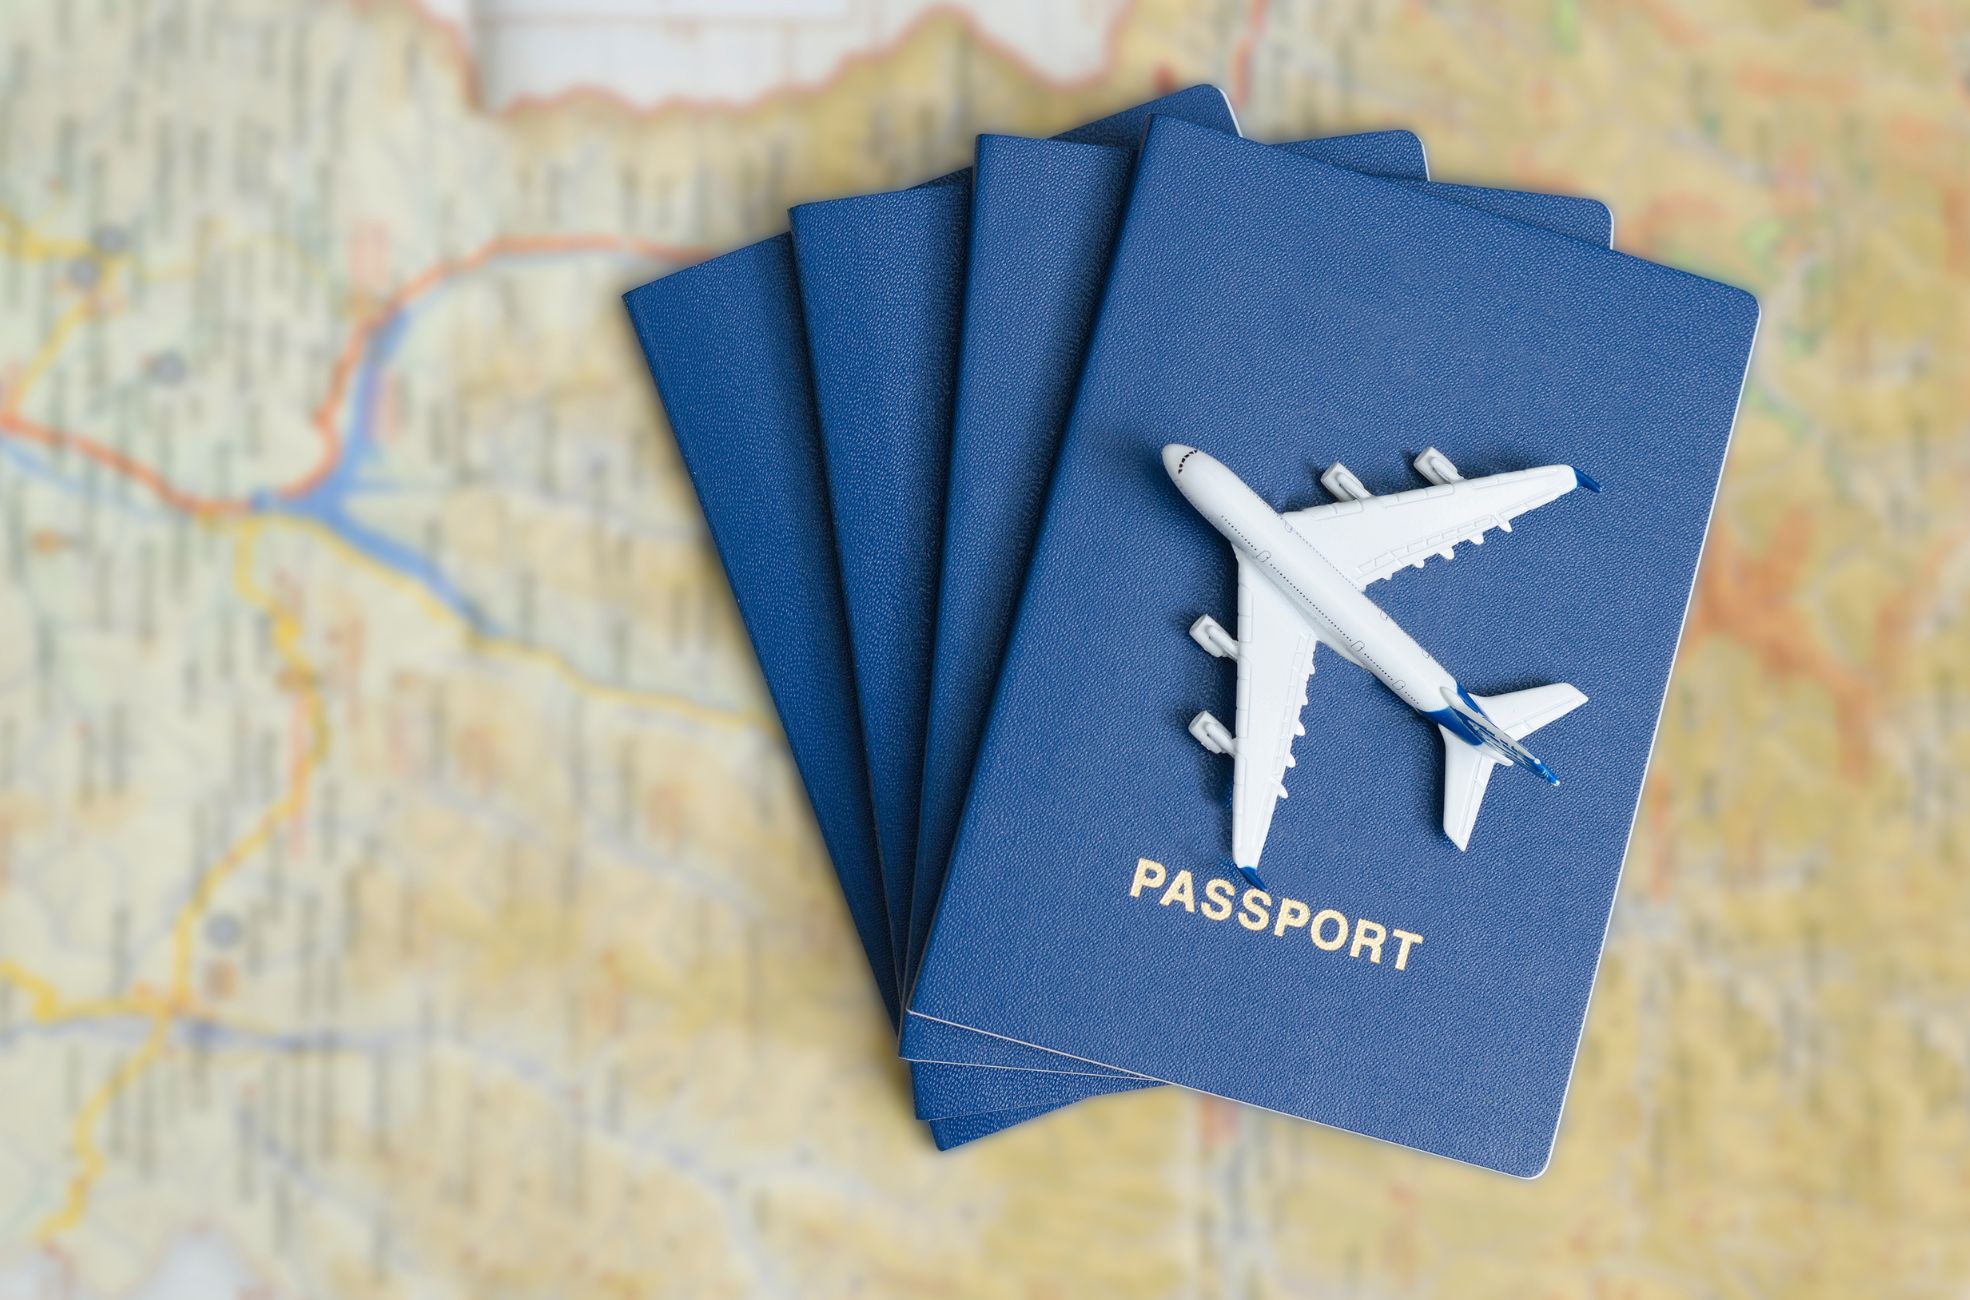 Stock Photo Of Visas And Passports For European Countries